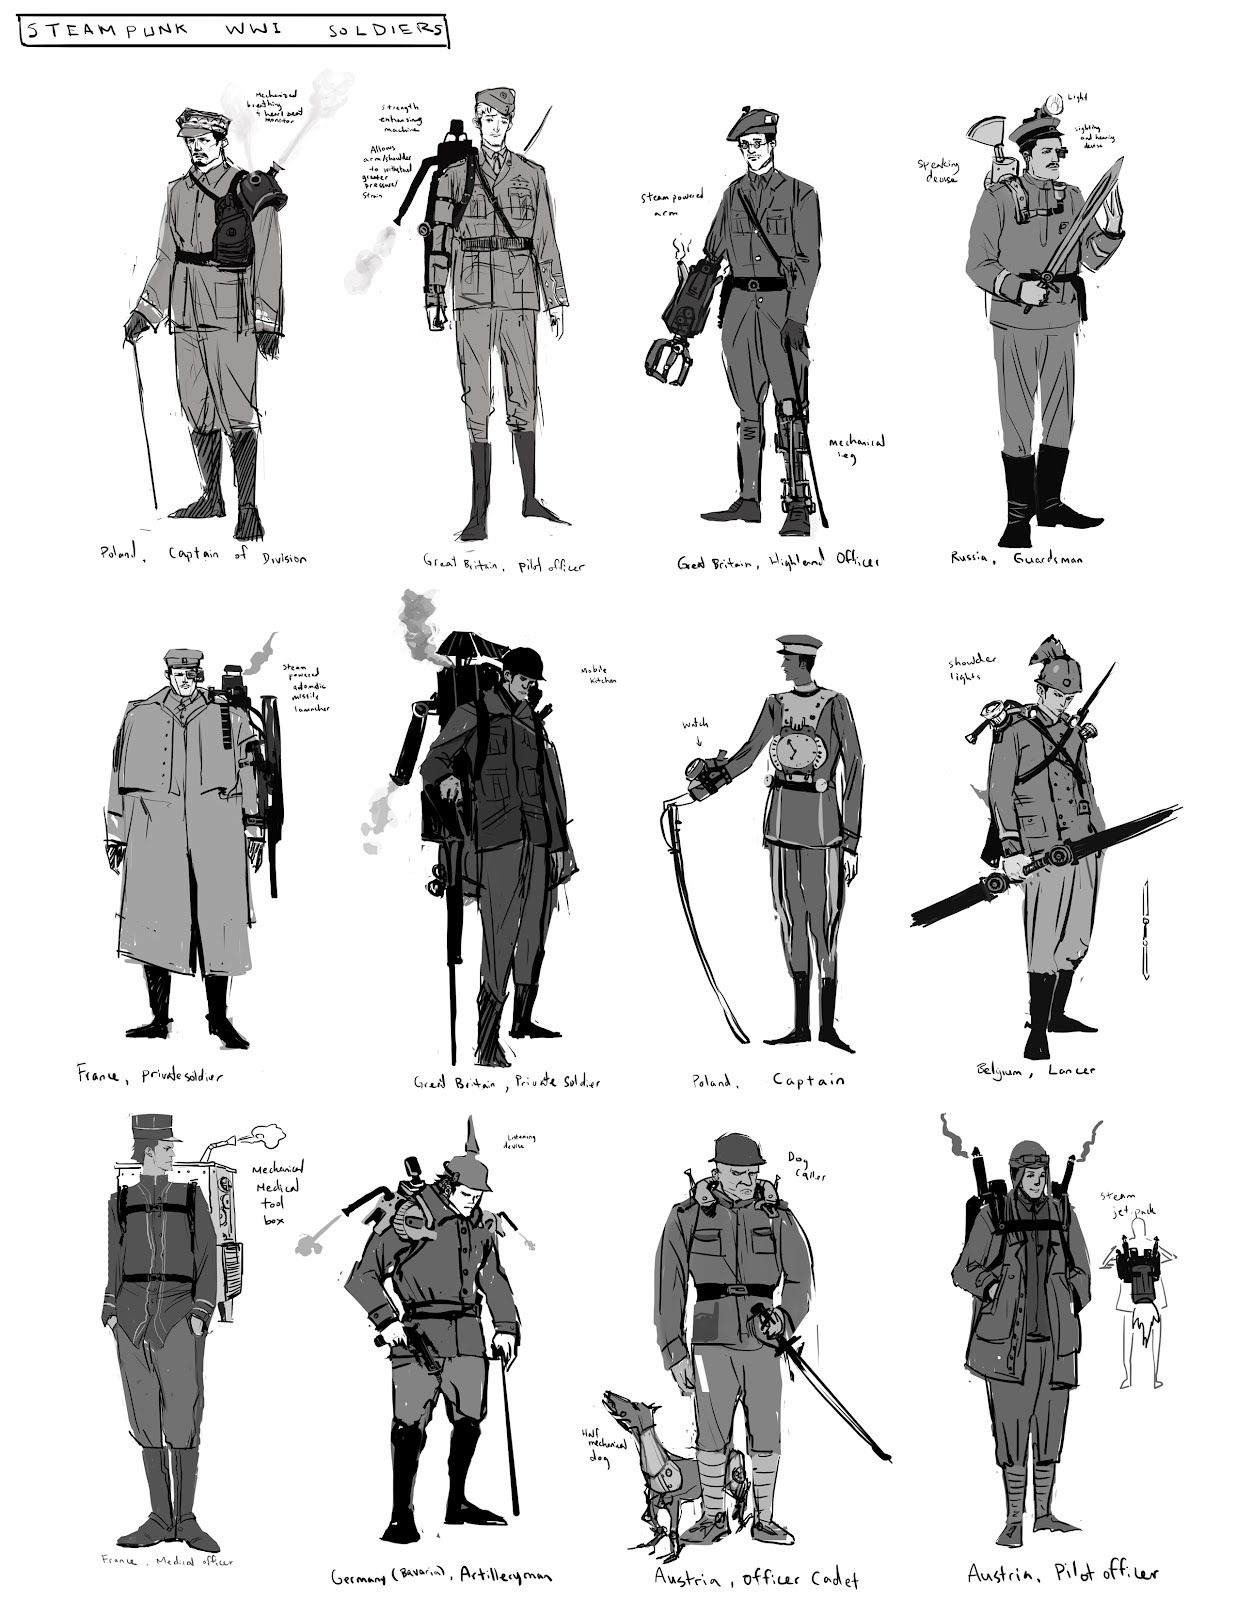 Steampunk Soldiers: Uniforms and Weapons from the Age of Steam